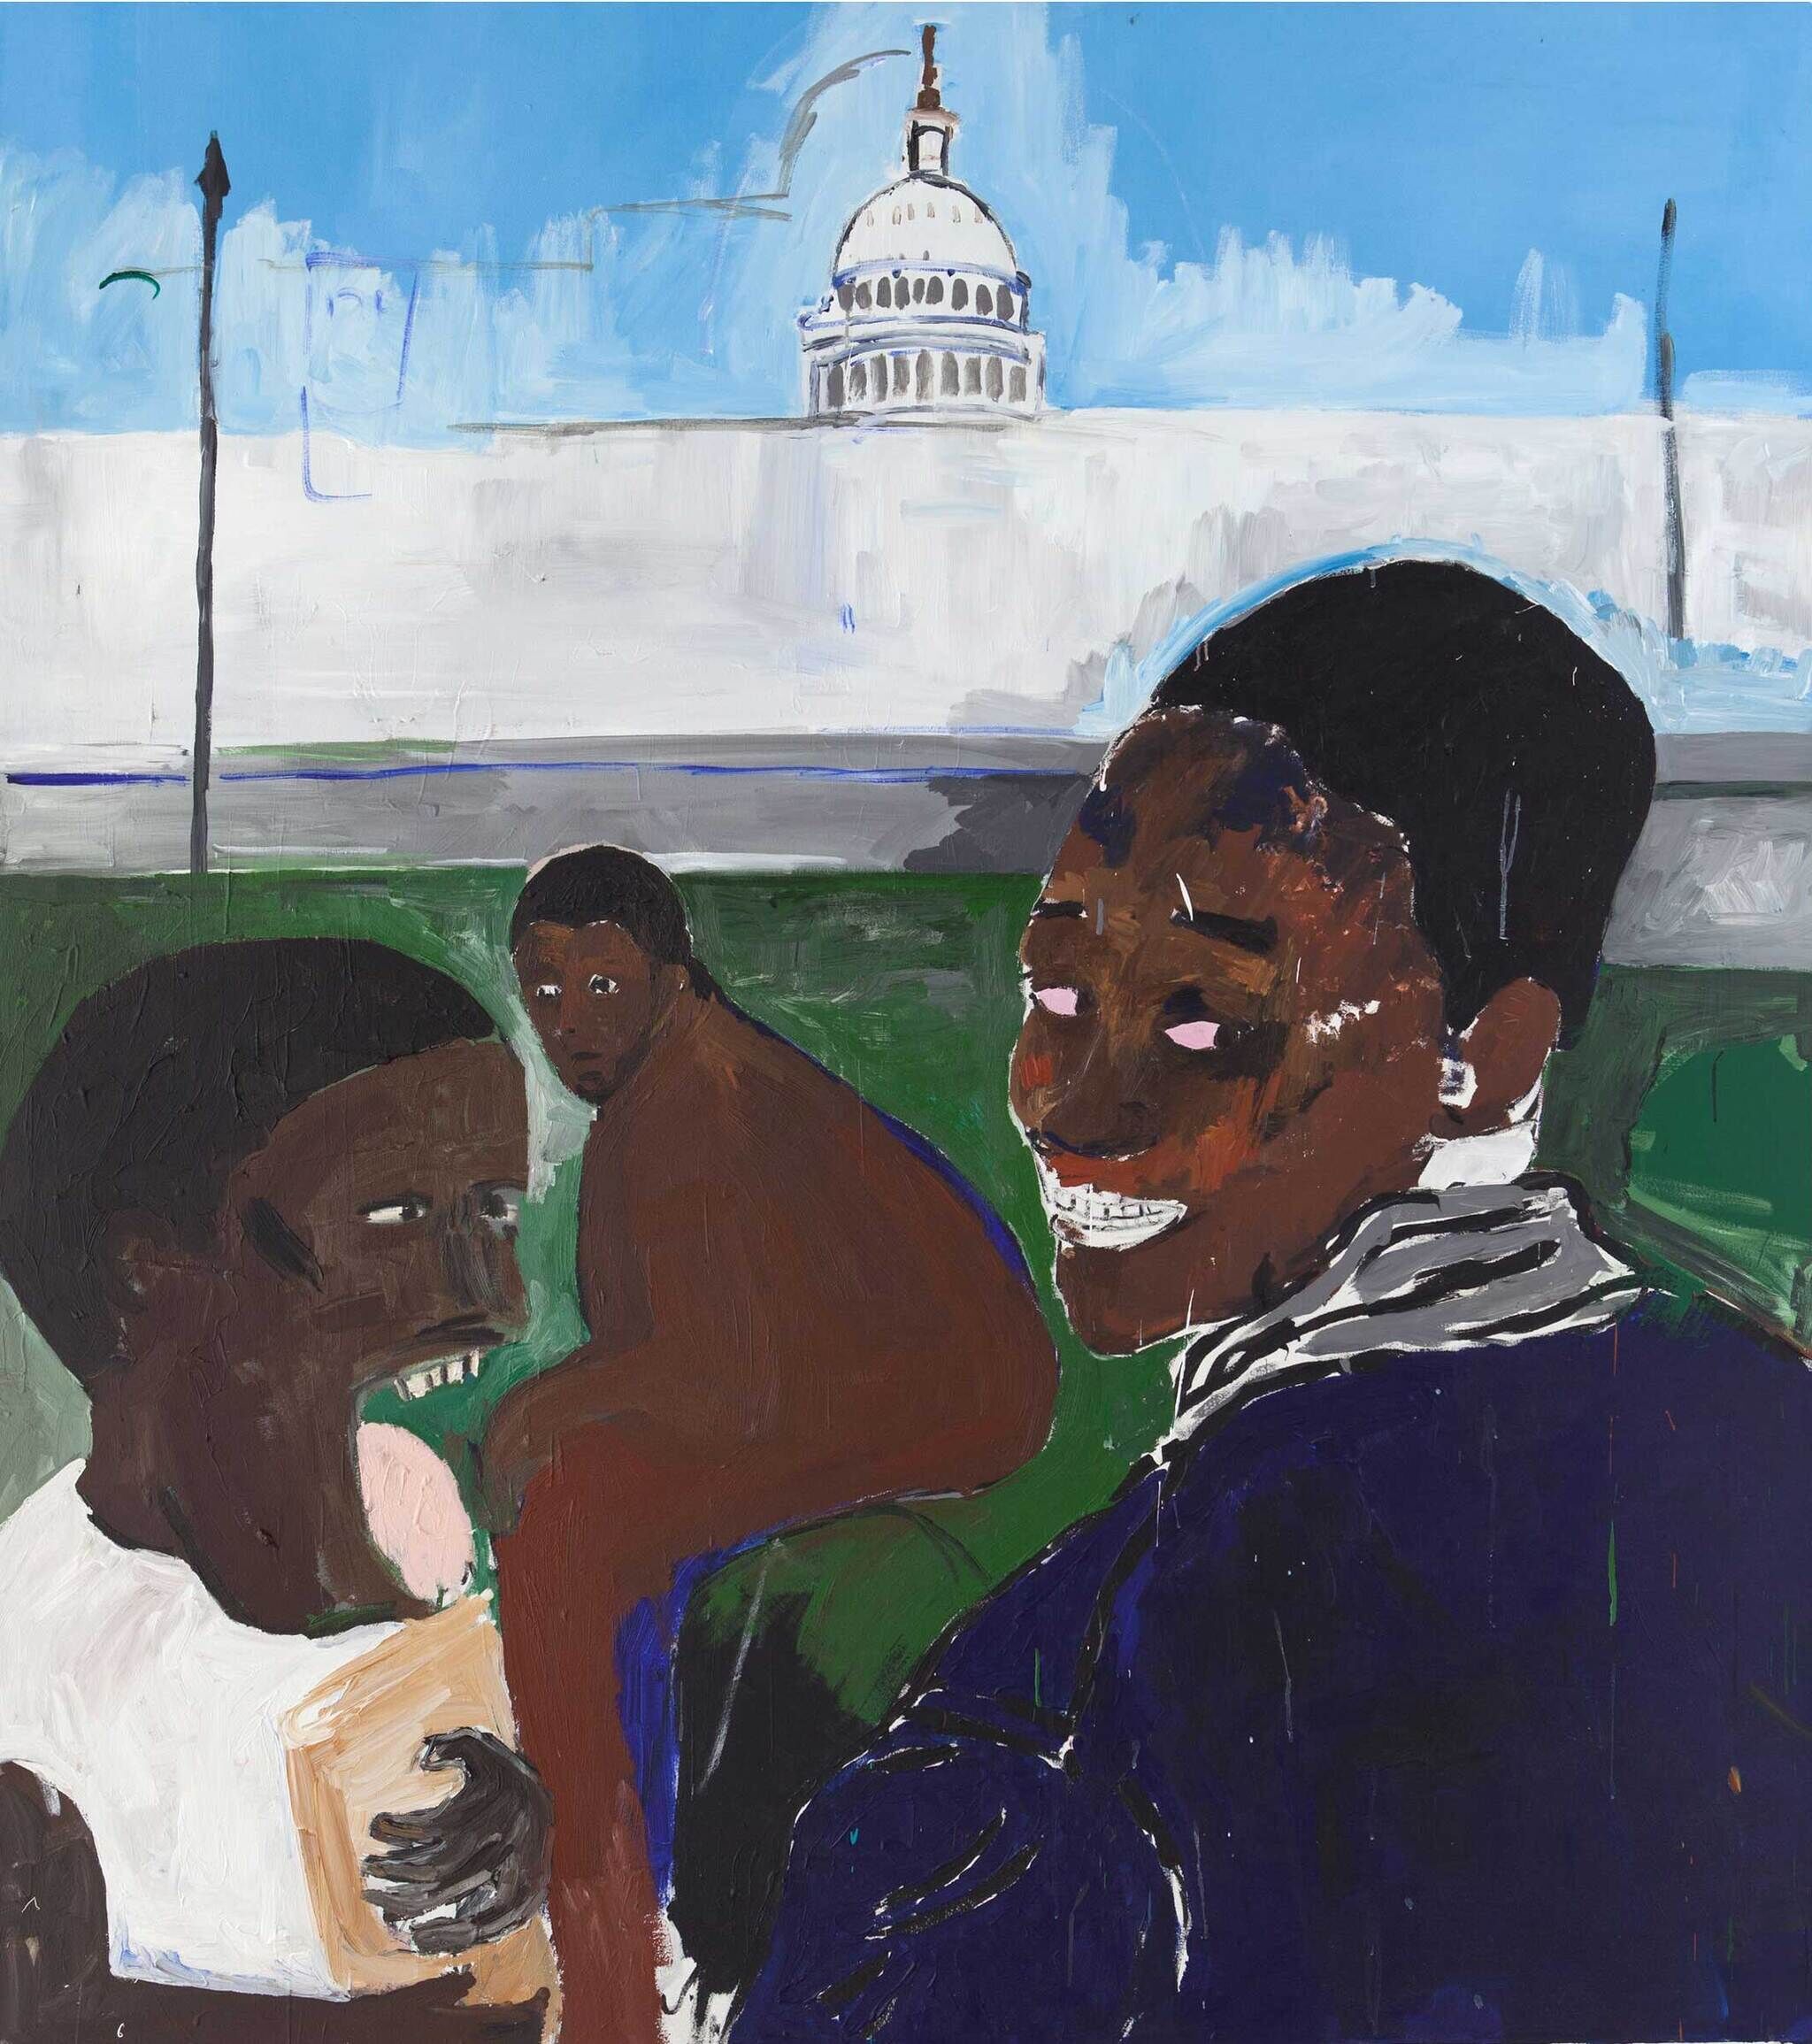 Three dark skinned figures stand on a grassy lawn in front of the White House. The rightmost figure has their back turned to the audience and turns their head back in a grin. In the center is a nude figure in a crouched position, as if they were seated. The leftmost figure stands with their head turned towards the center, with their mouth open wide. They are wearing a bright white shirt and clutch a nude colored book to their chest.